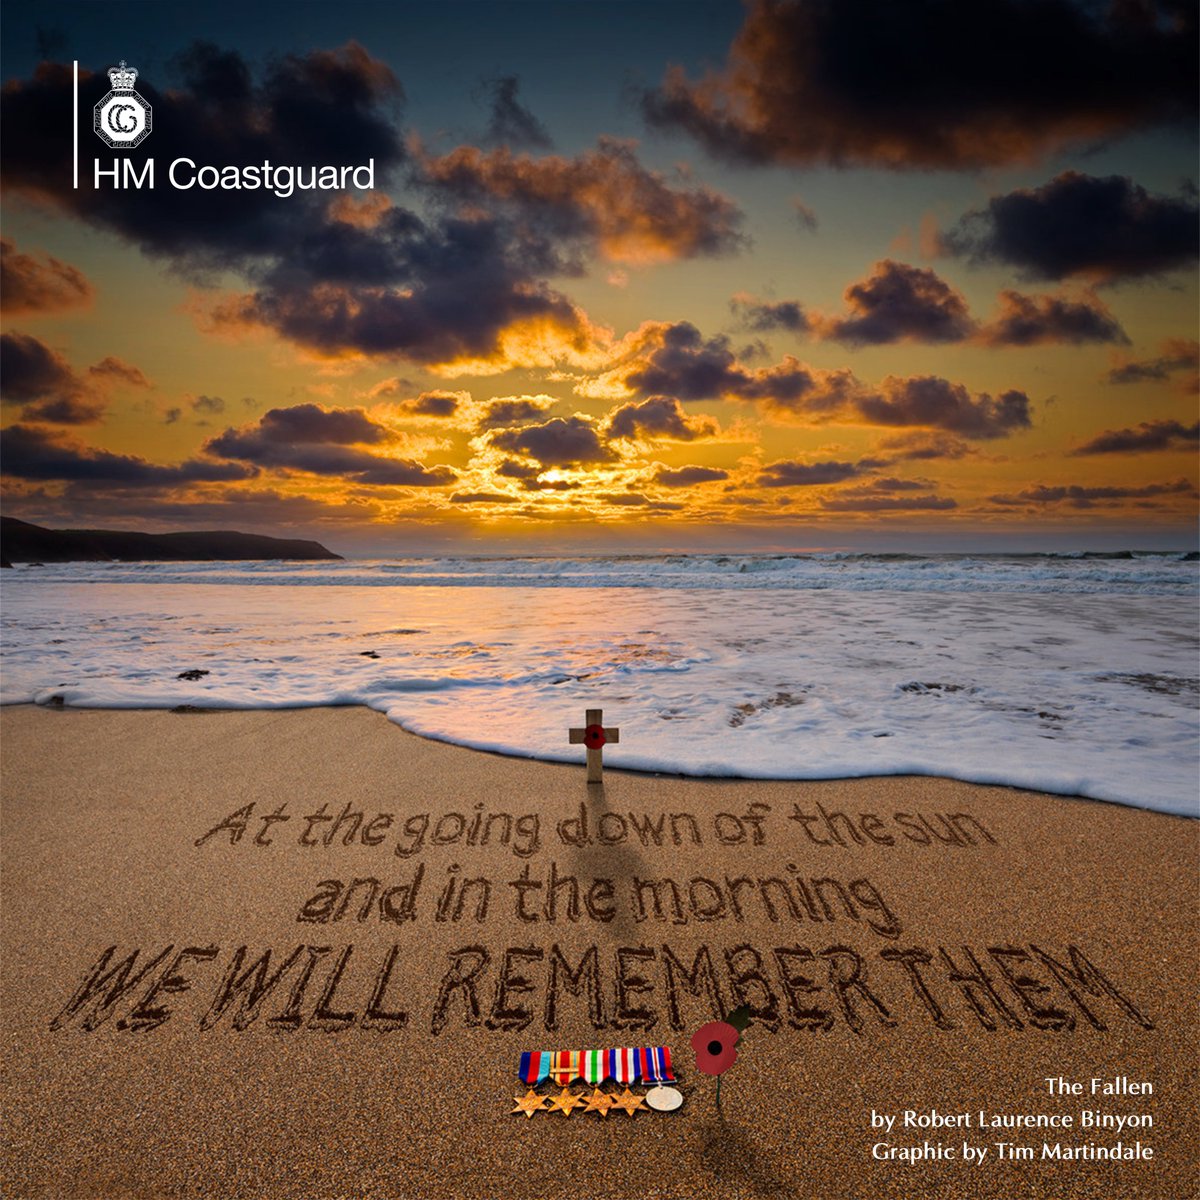 Newhaven Coastguard will be remembering the fallen at both Newhaven and Peacehaven memorials today. We will remember them.